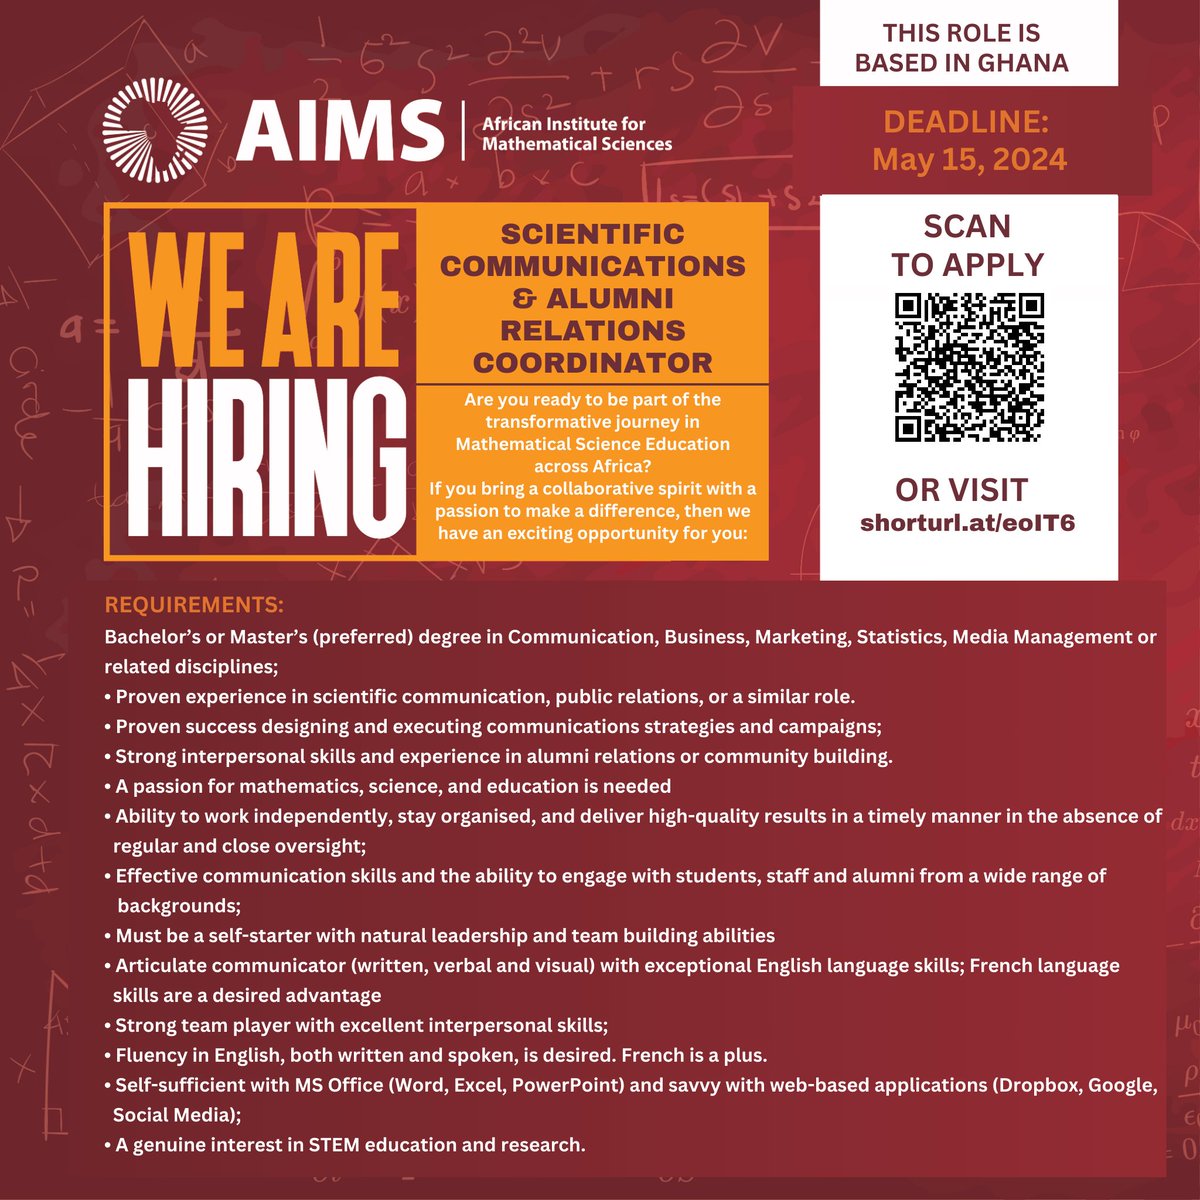 📢 @AIMSGhana has four job openings! Visit aims.edu.gh/work-at-aims/ and #ApplyNow. 📷 Branding and Design Specialist 📷 Scientific Communications and Alumni Relations Coordinator 📷 Academic Director Undergraduate 📷 Senior Manager, Communications #hiringalert #jobseekers